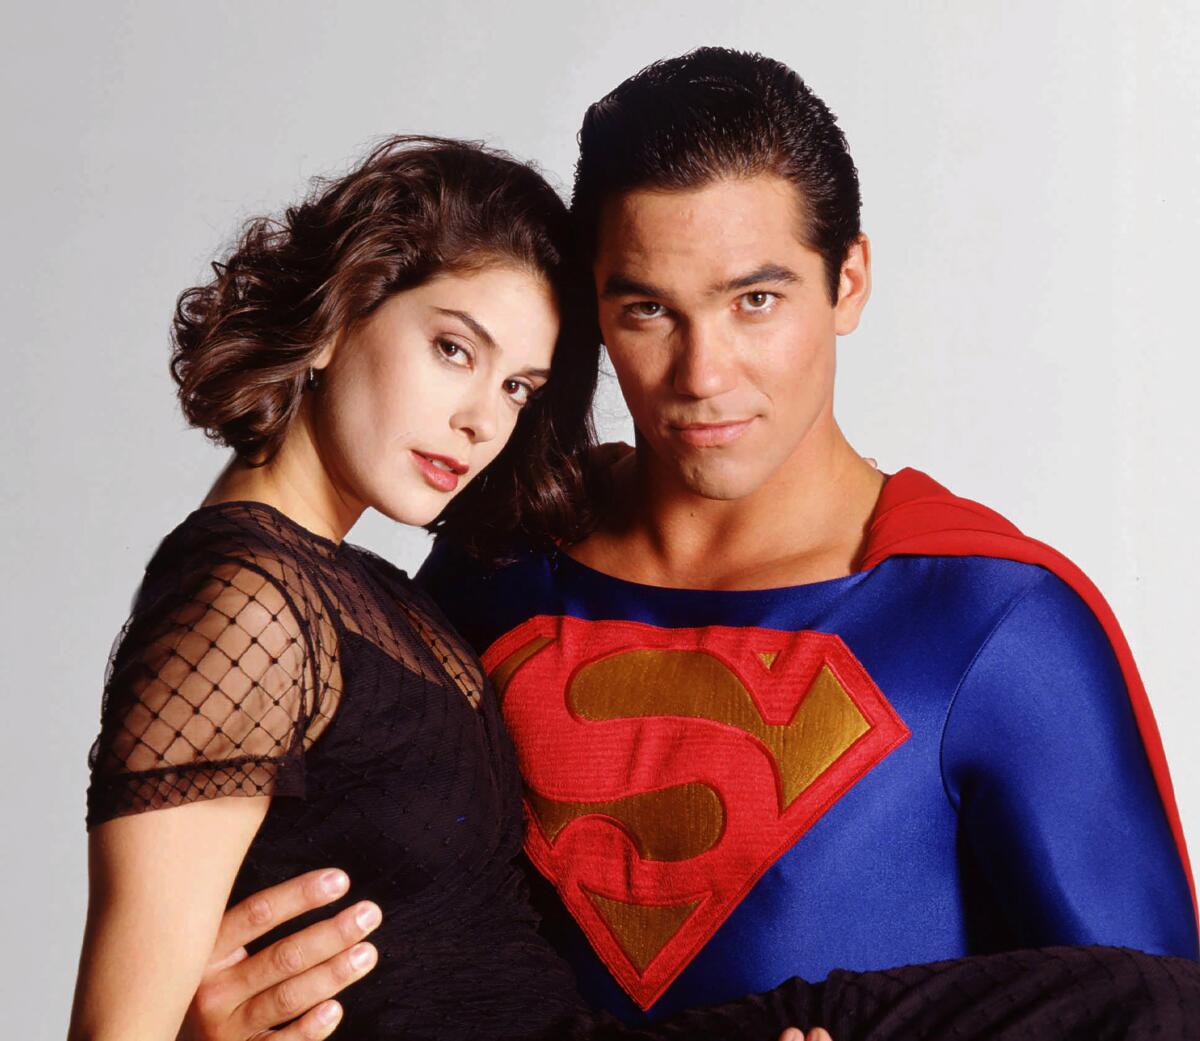 Teri Hatcher, left, as Lois Lane in a black sheer dress is held by Dean Cain, who is in a Superman uniform.